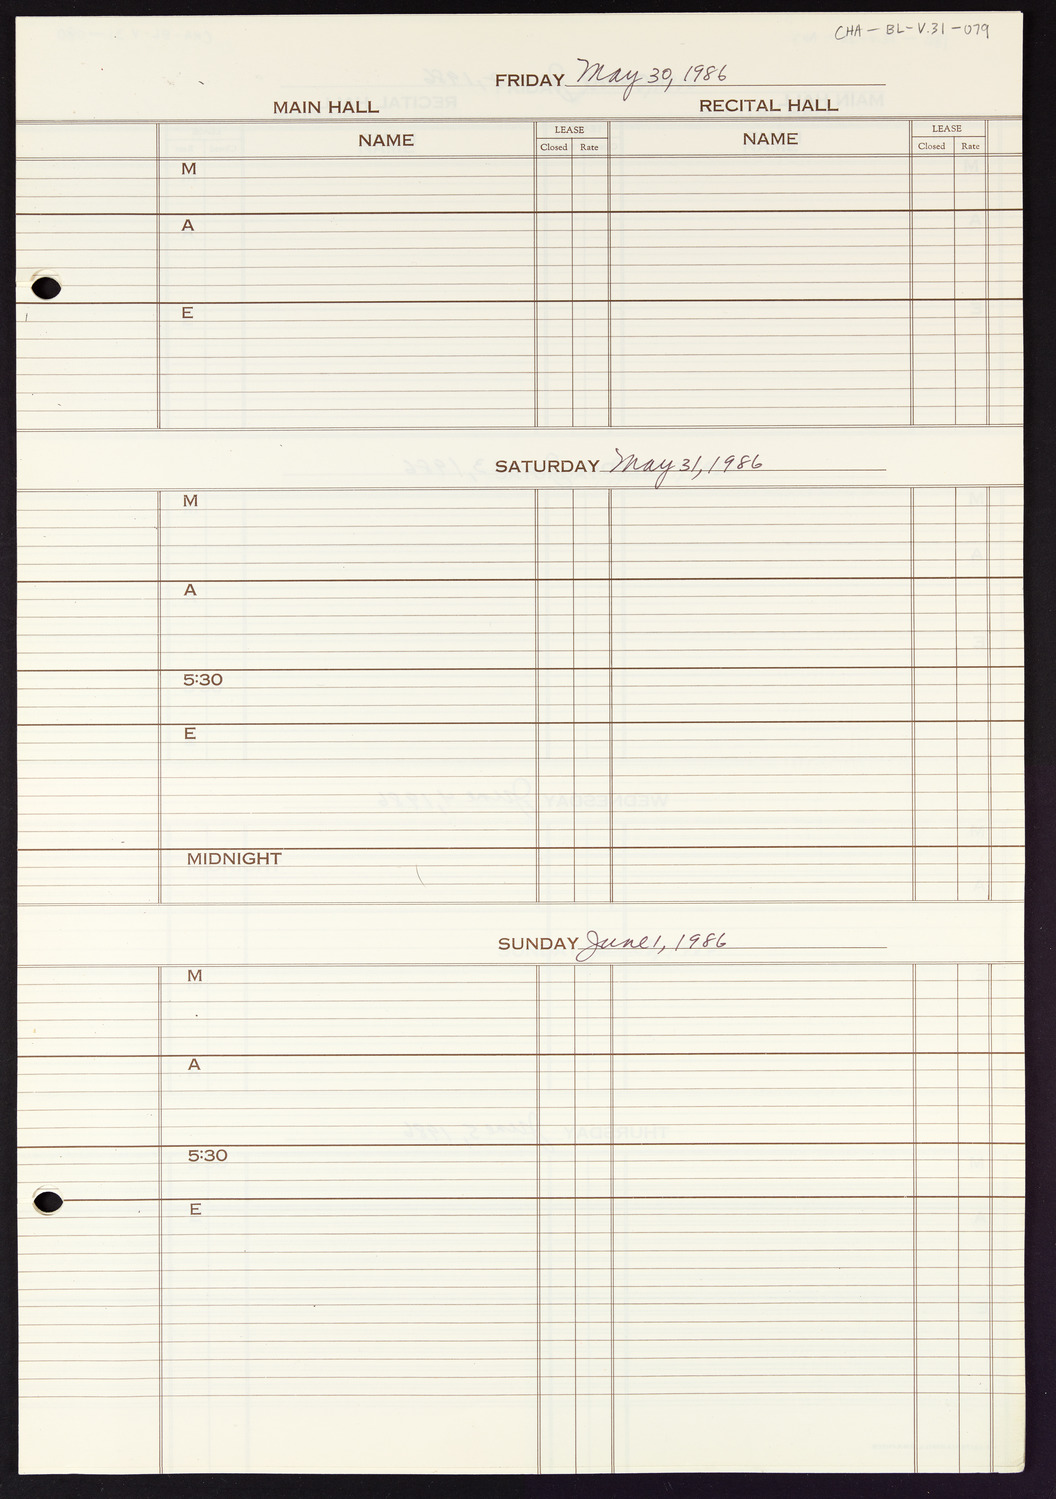 Carnegie Hall Booking Ledger, volume 31, page 79